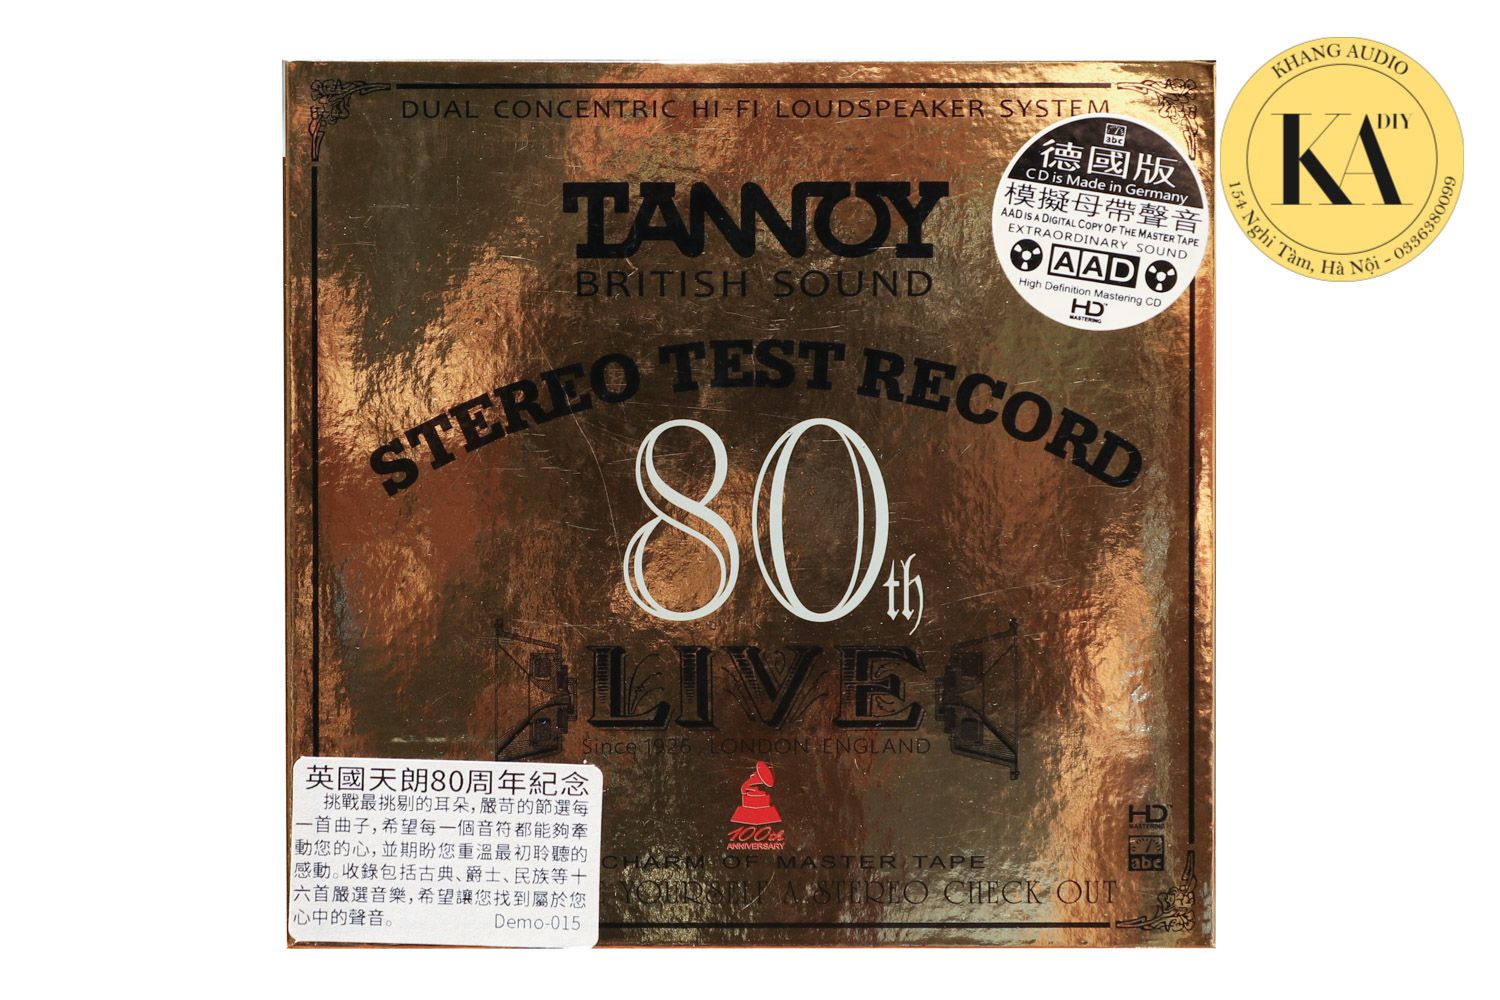 Stereo Test Record 80th LIVE Khang Audio 0336380099